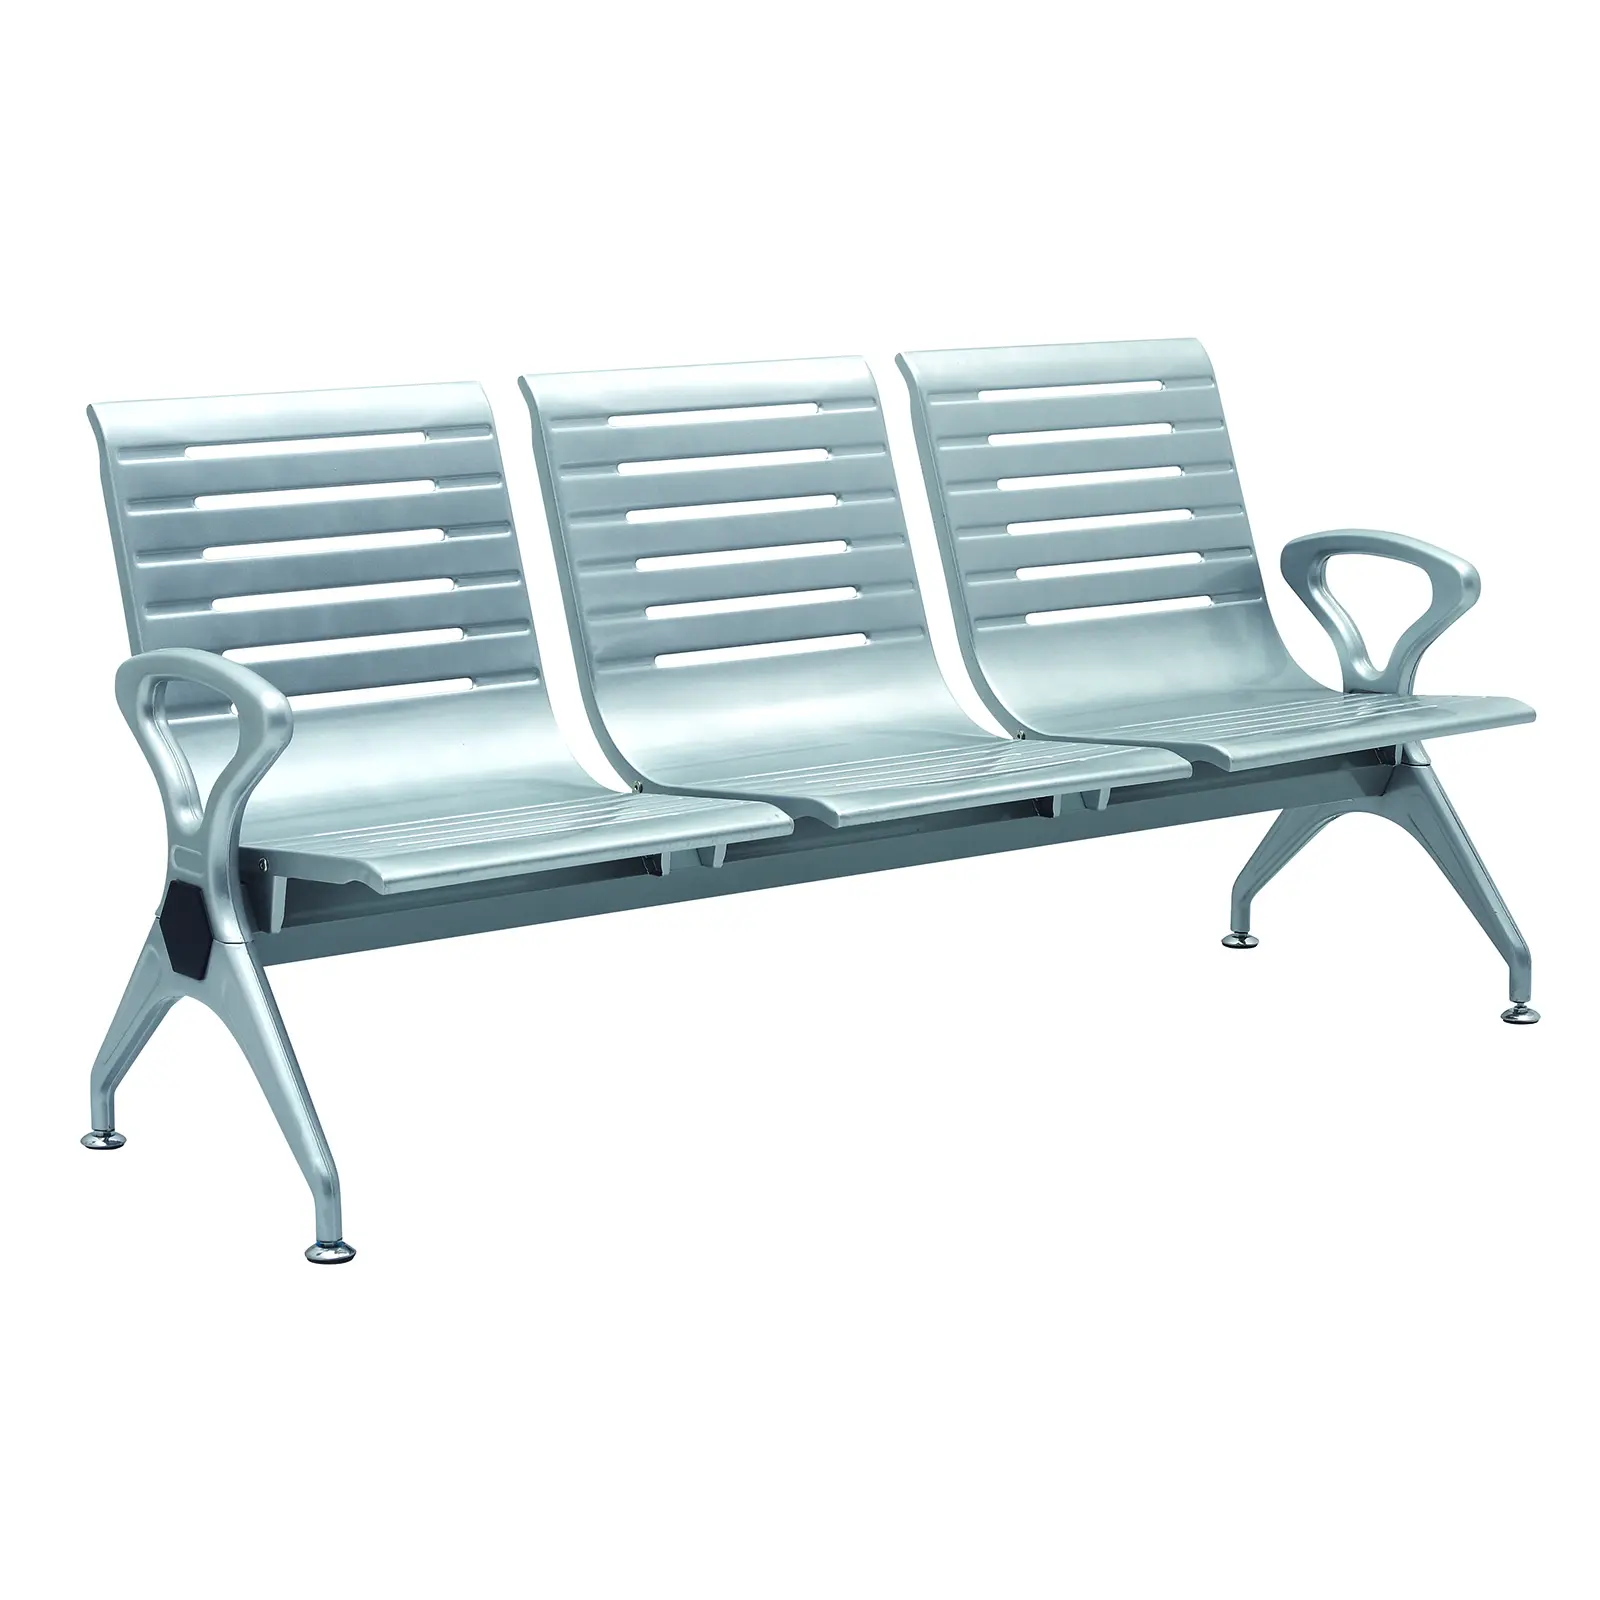 Good price cold rolled steel airport waiting chair waiting bench public waiting chair hospital chair